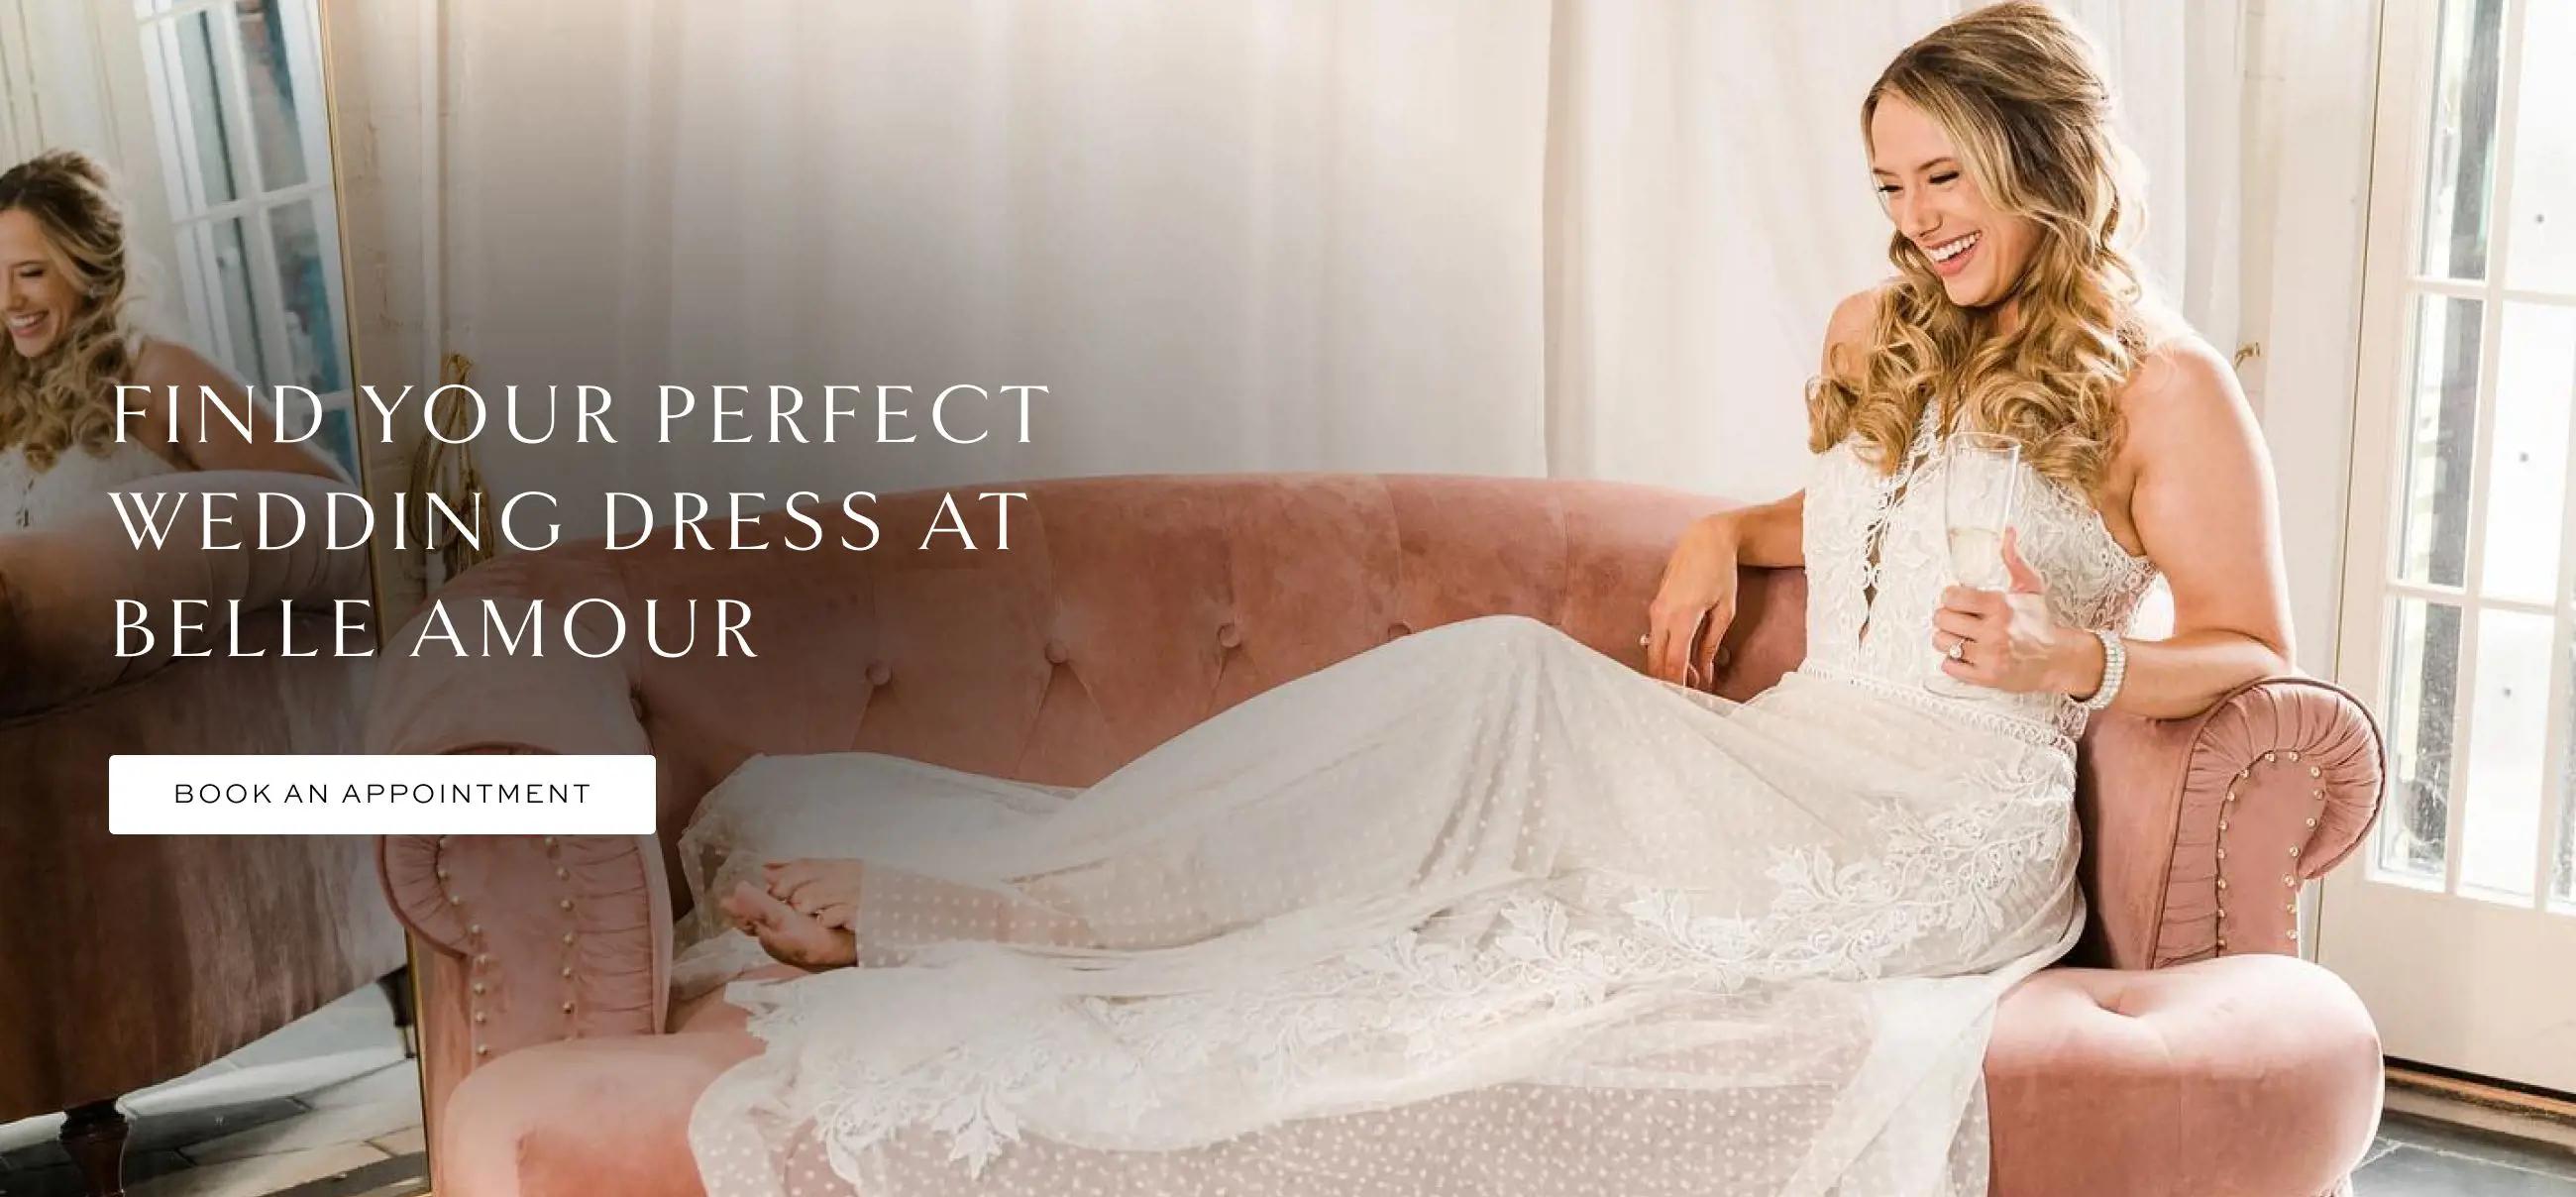 Find your dream wedding dress at Belle Amour Bridal